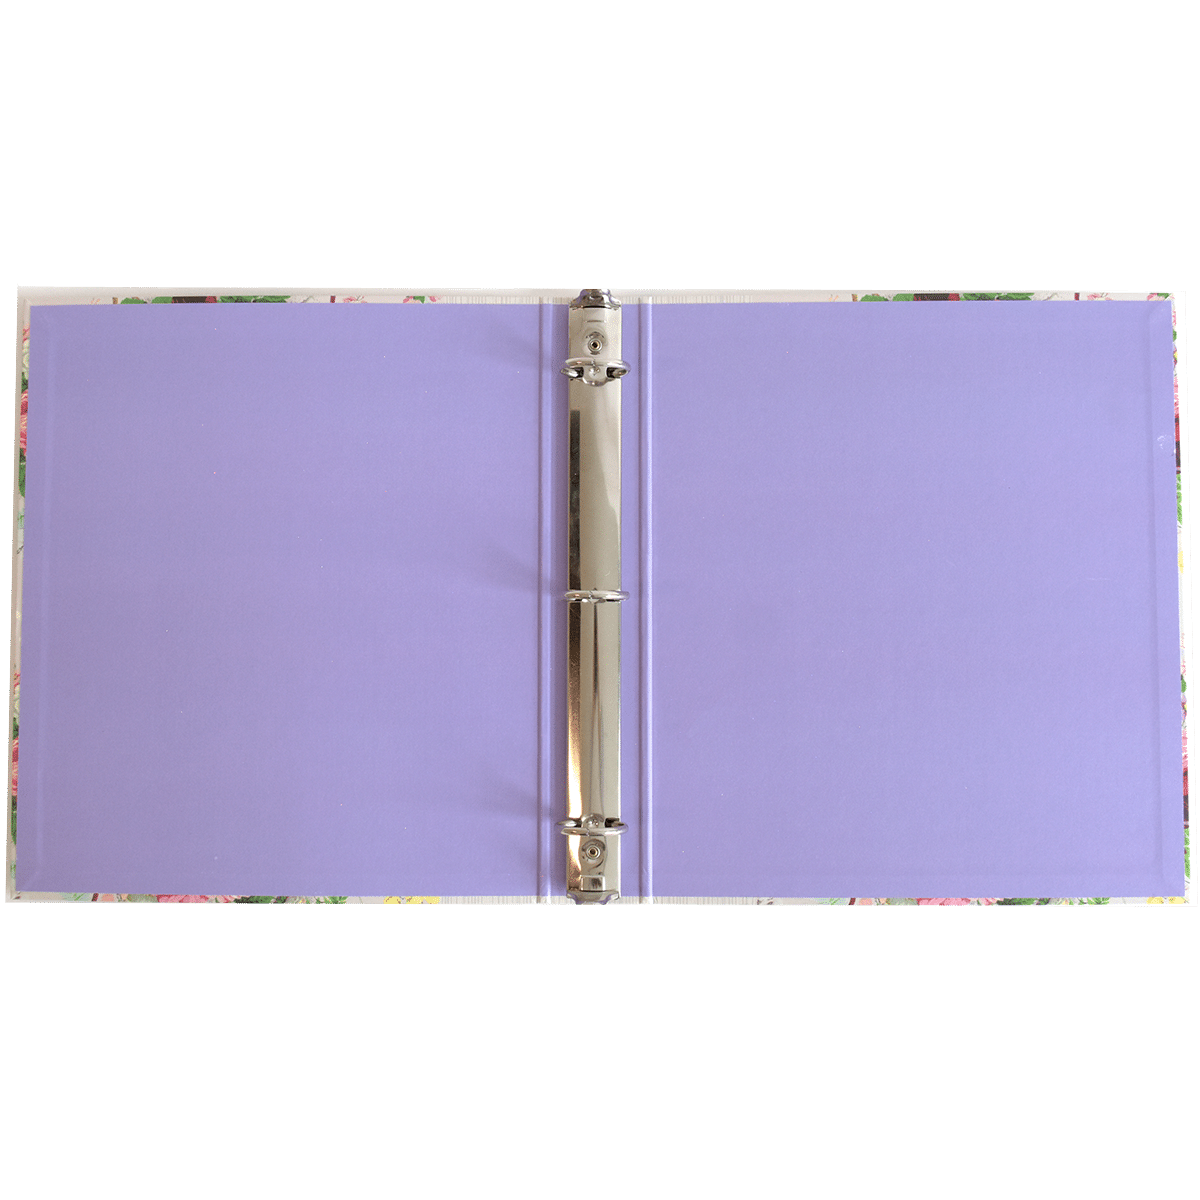 a purple binder with a pen on top of it.